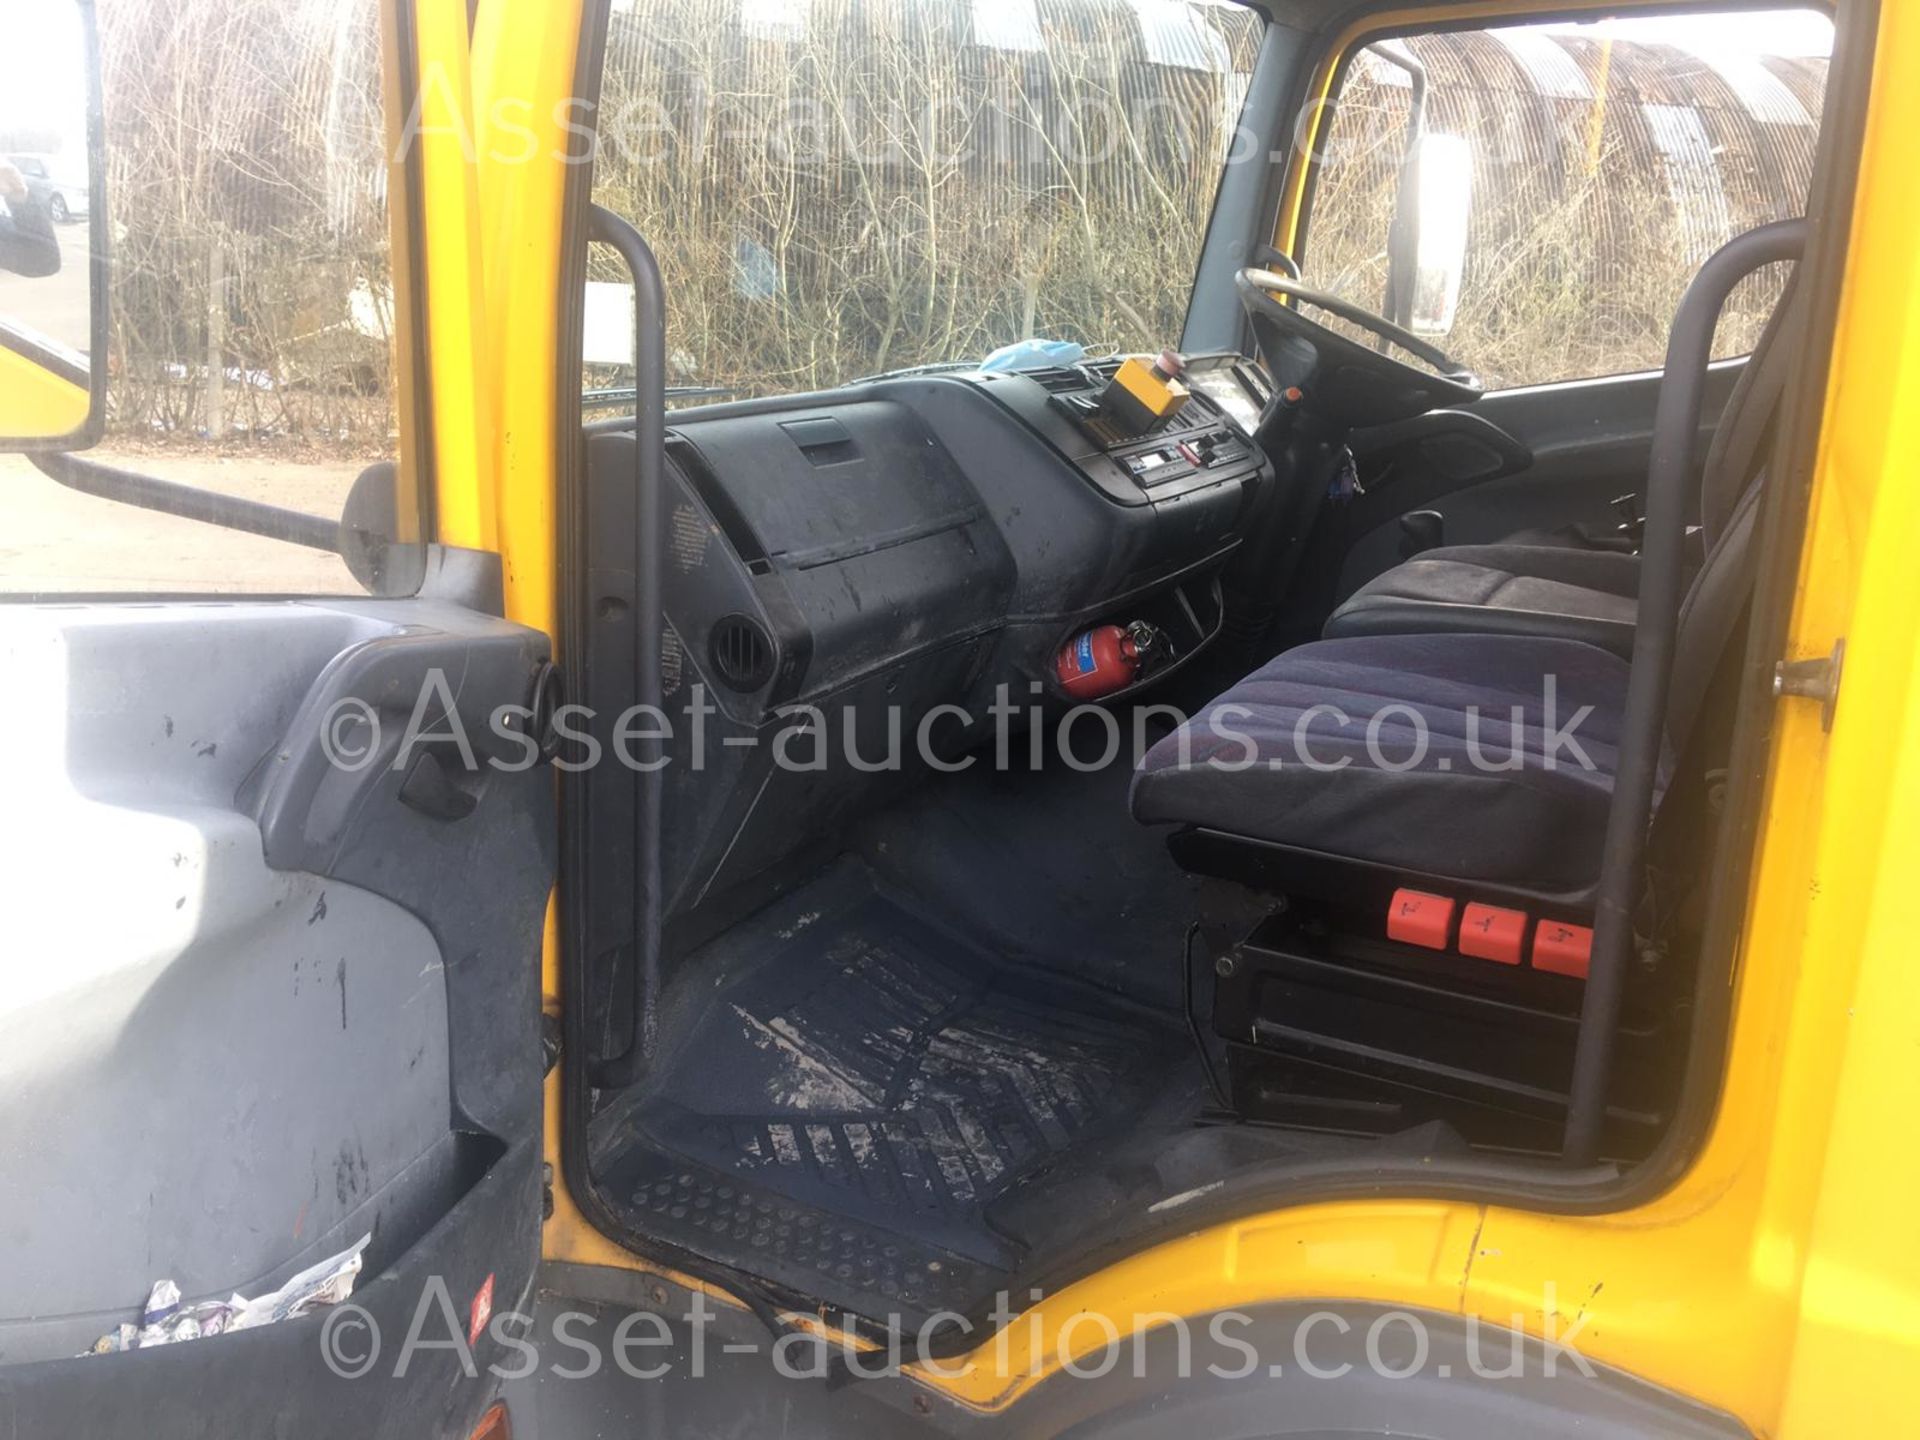 2004/54 REG MERCEDES ATEGO 1018 DAY YELLOW DROPSIDE LINE PAINTING LORRY 4.3L DIESEL ENGINE *NO VAT* - Image 53 of 128